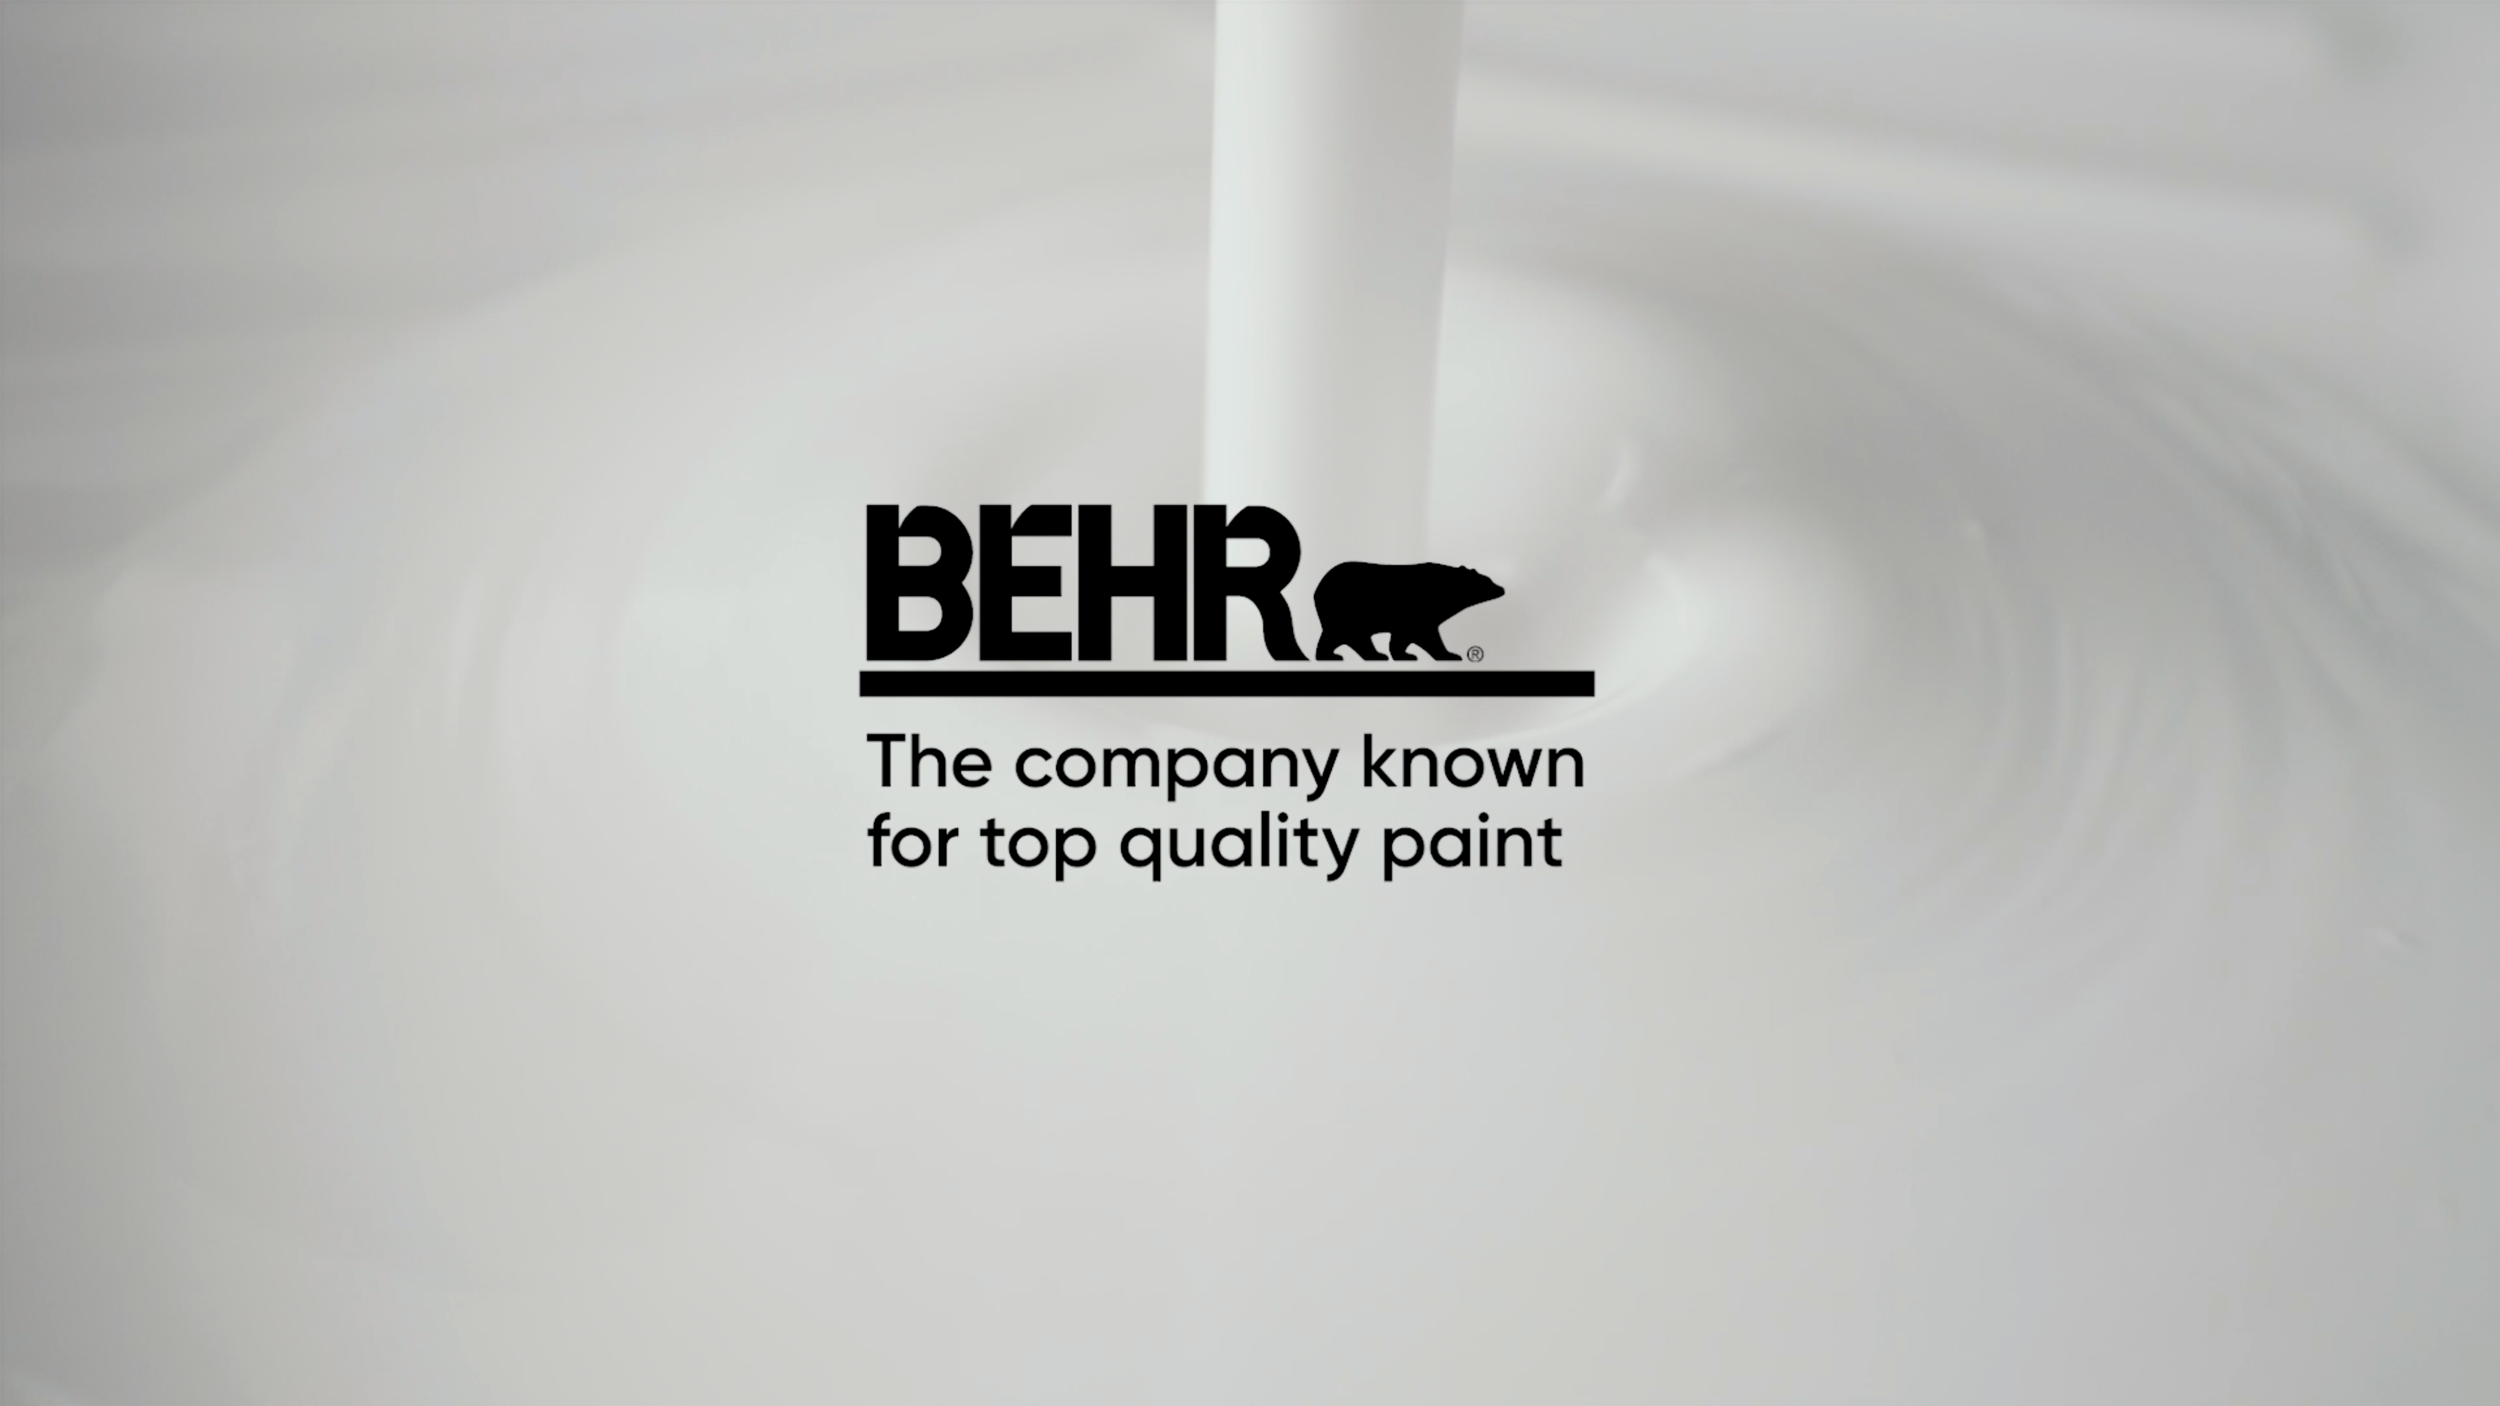  BEHR PAINT CAMPAIGN - DIRECTOR 